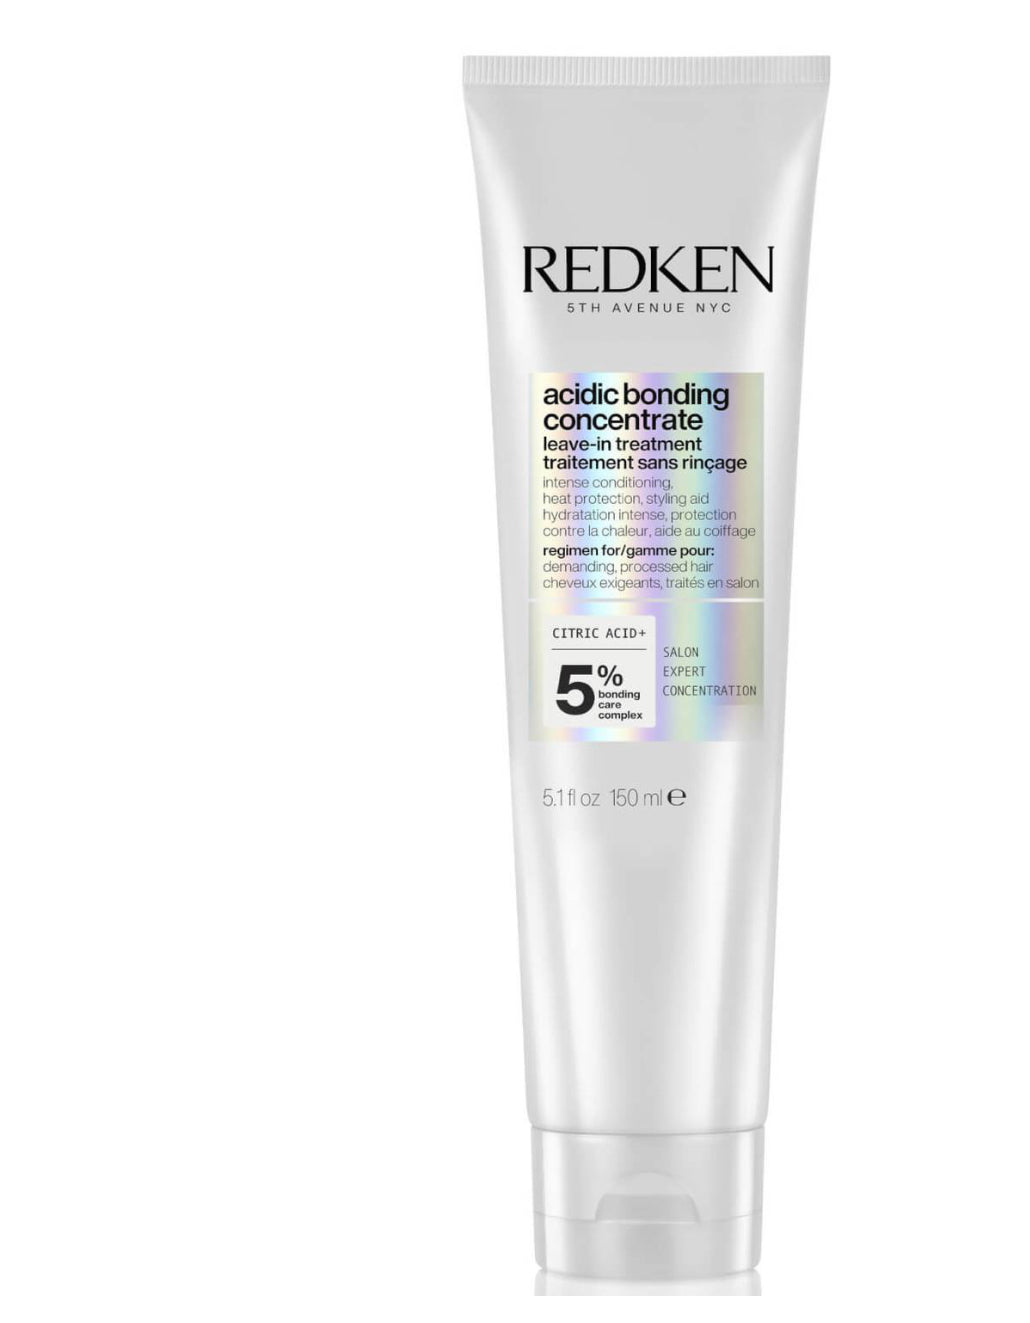 Redken Acidic Bonding Concentrate leave in treatment